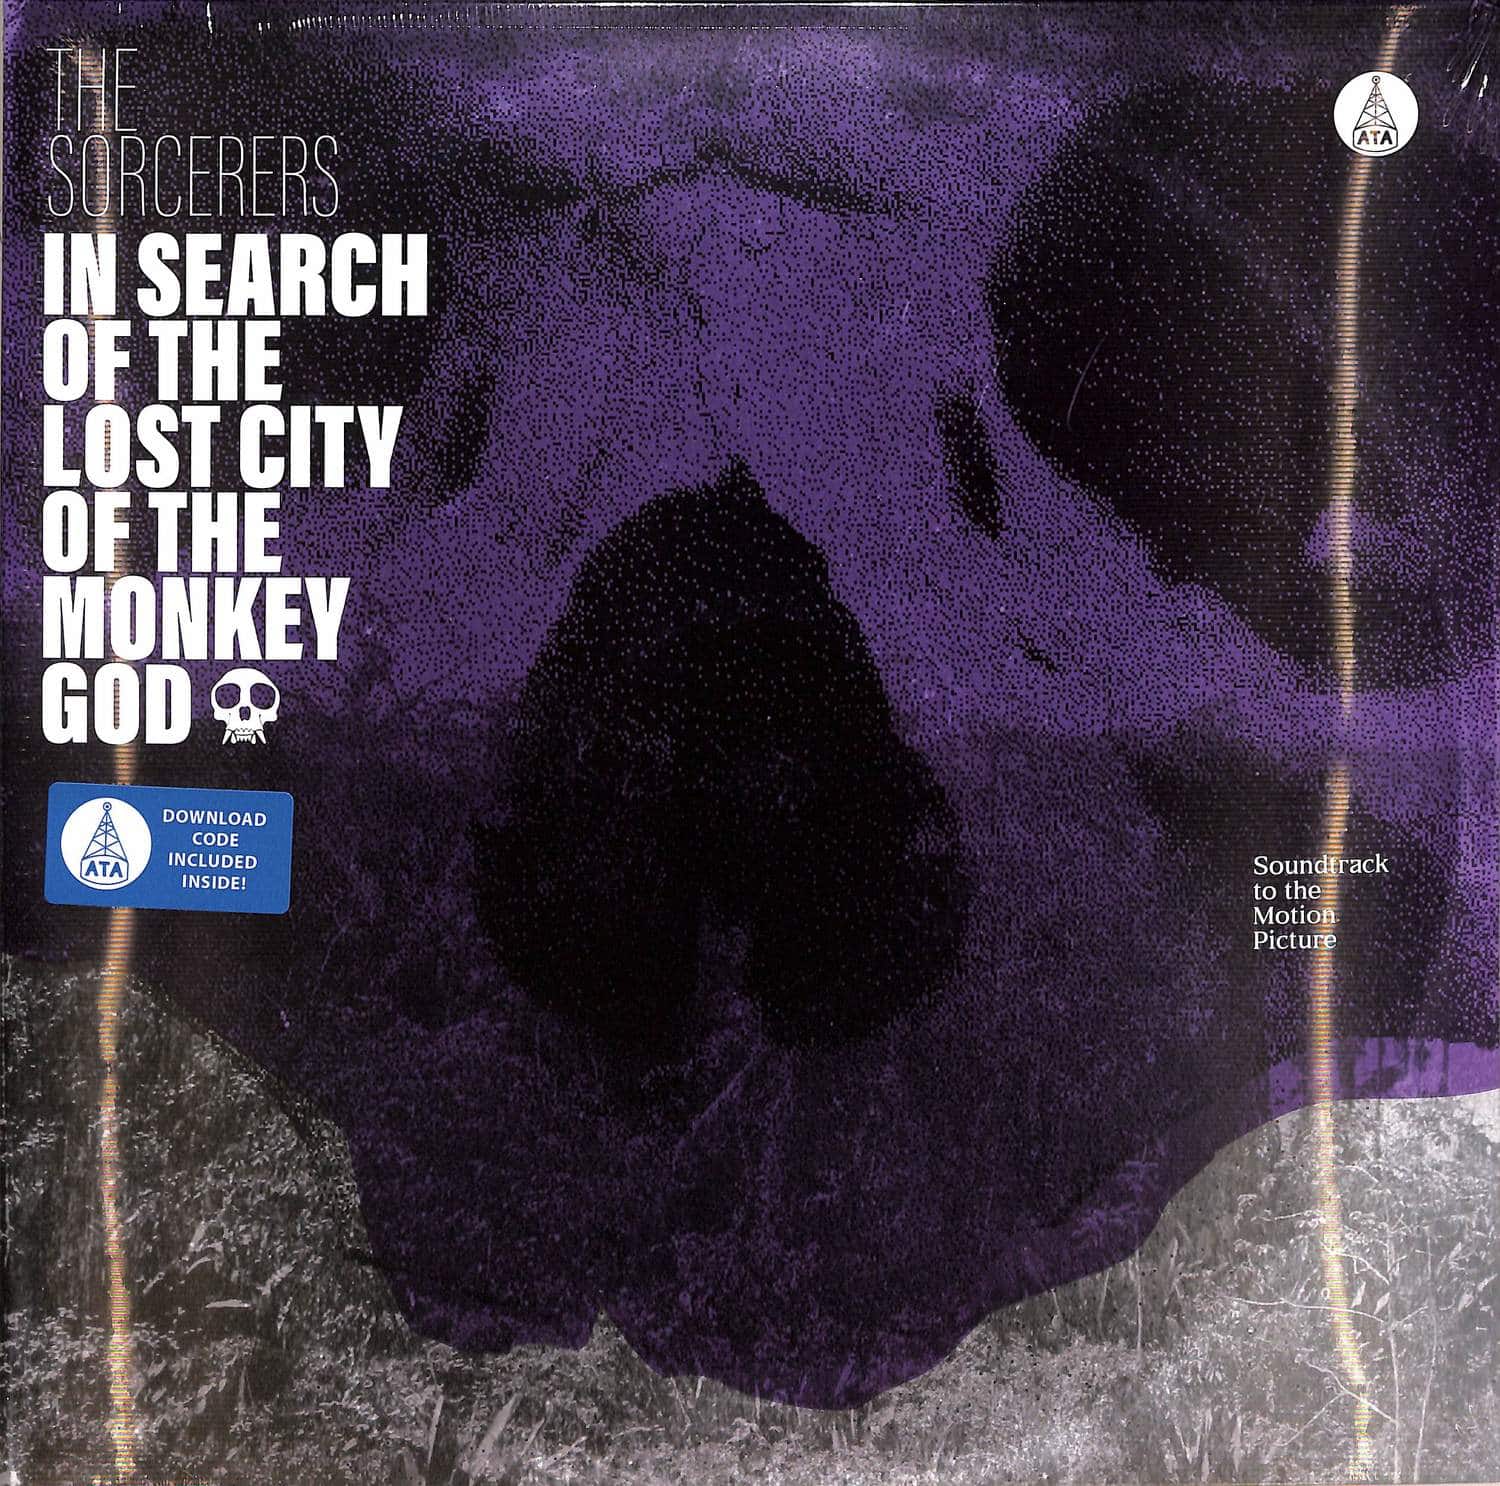 The Sorcerers - IN SEARCH OF THE LOST CITY OF THE MONKEY GOD 